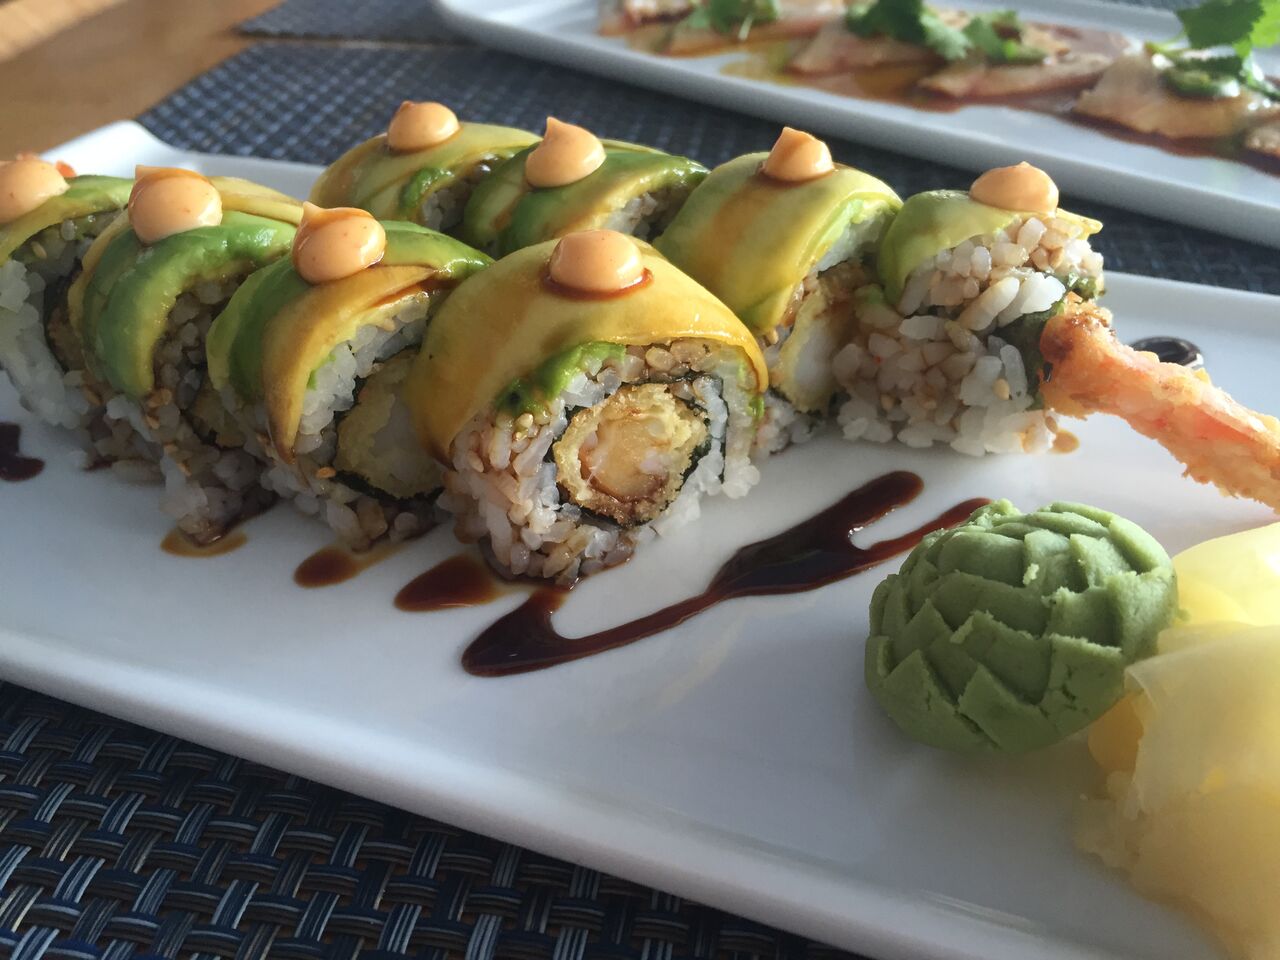 Budda-cane roll, with shrimp tempura, mango, and sugarcane soy, from Sushi Maki in Coral Gables. Click to read more or Pin and save for later.